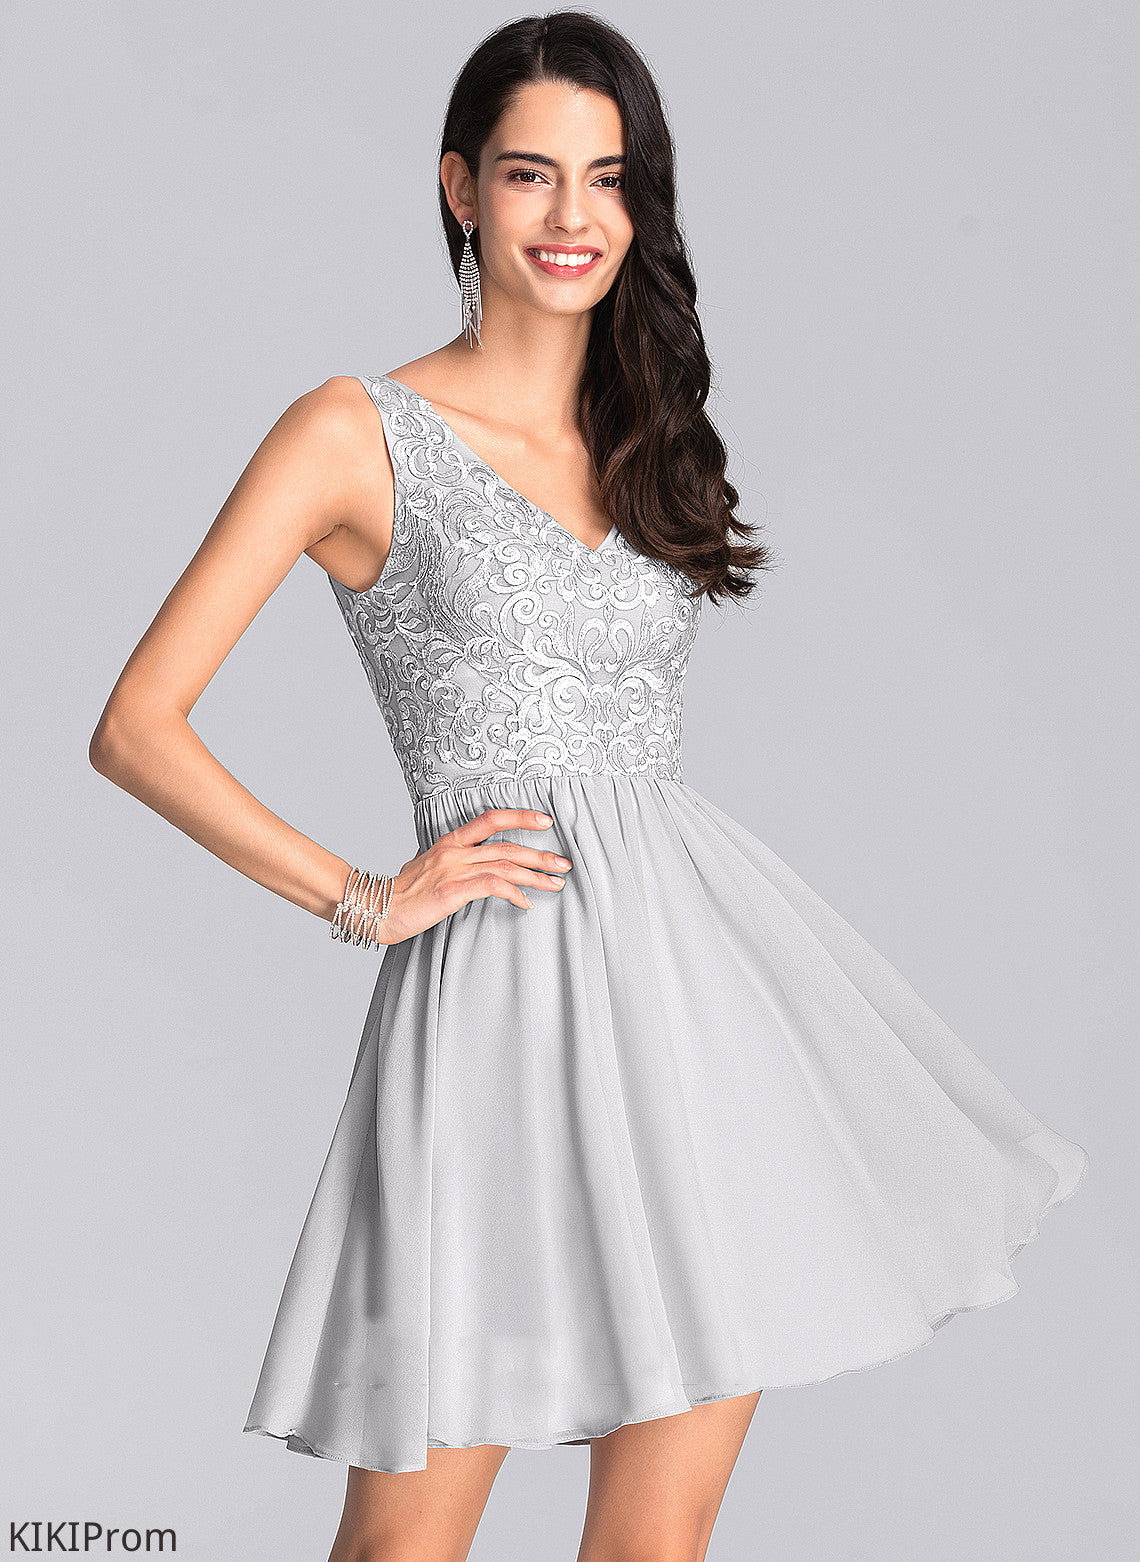 Short/Mini Lace Adelaide Dress Homecoming Dresses Sequins With V-neck Homecoming Chiffon A-Line